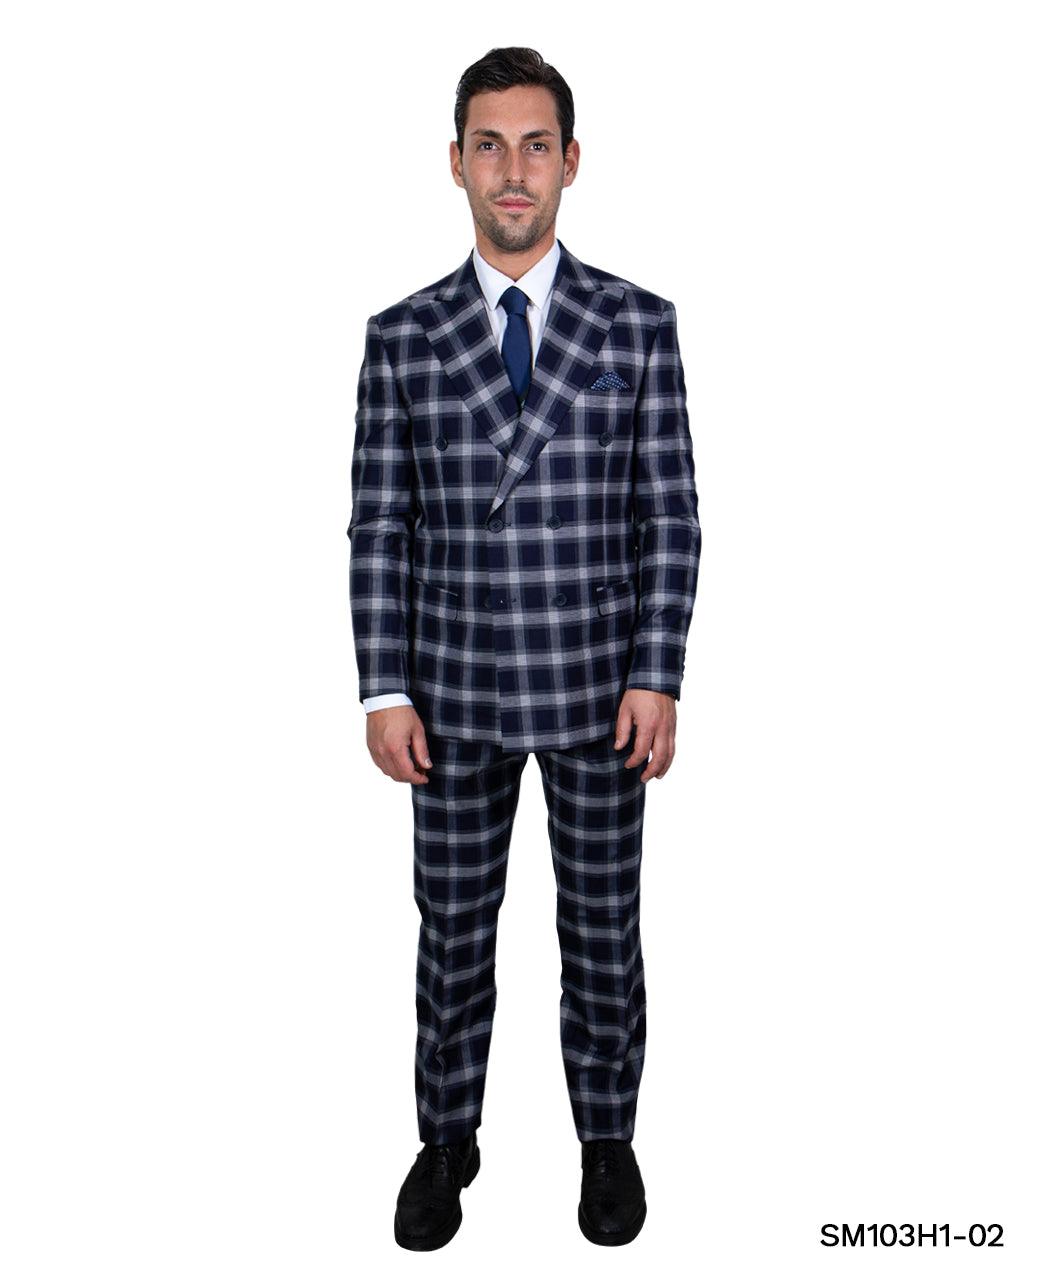 Stacy Adams Hybrid Fit Double-Breast Suit, Navy Blue & White Plaid - Julinie